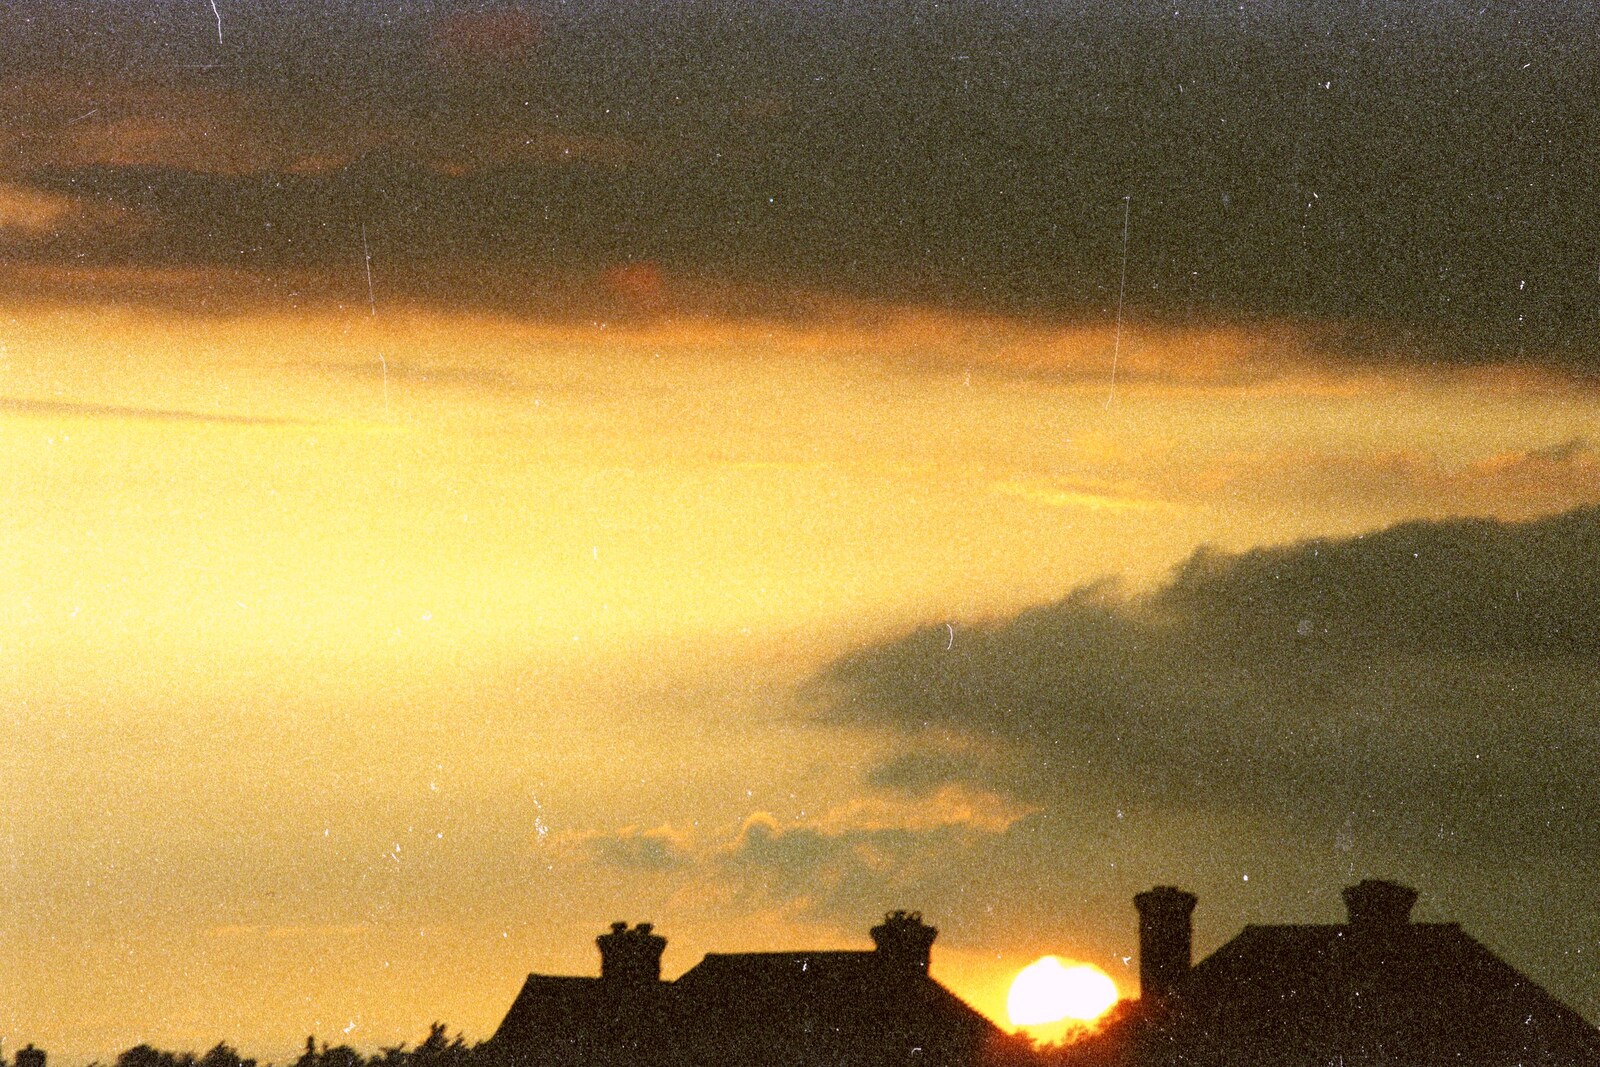 Sunset on Barton clifftop from A Ford Cottage Miscellany, Barton on Sea, Hampshire - 7th July 1986